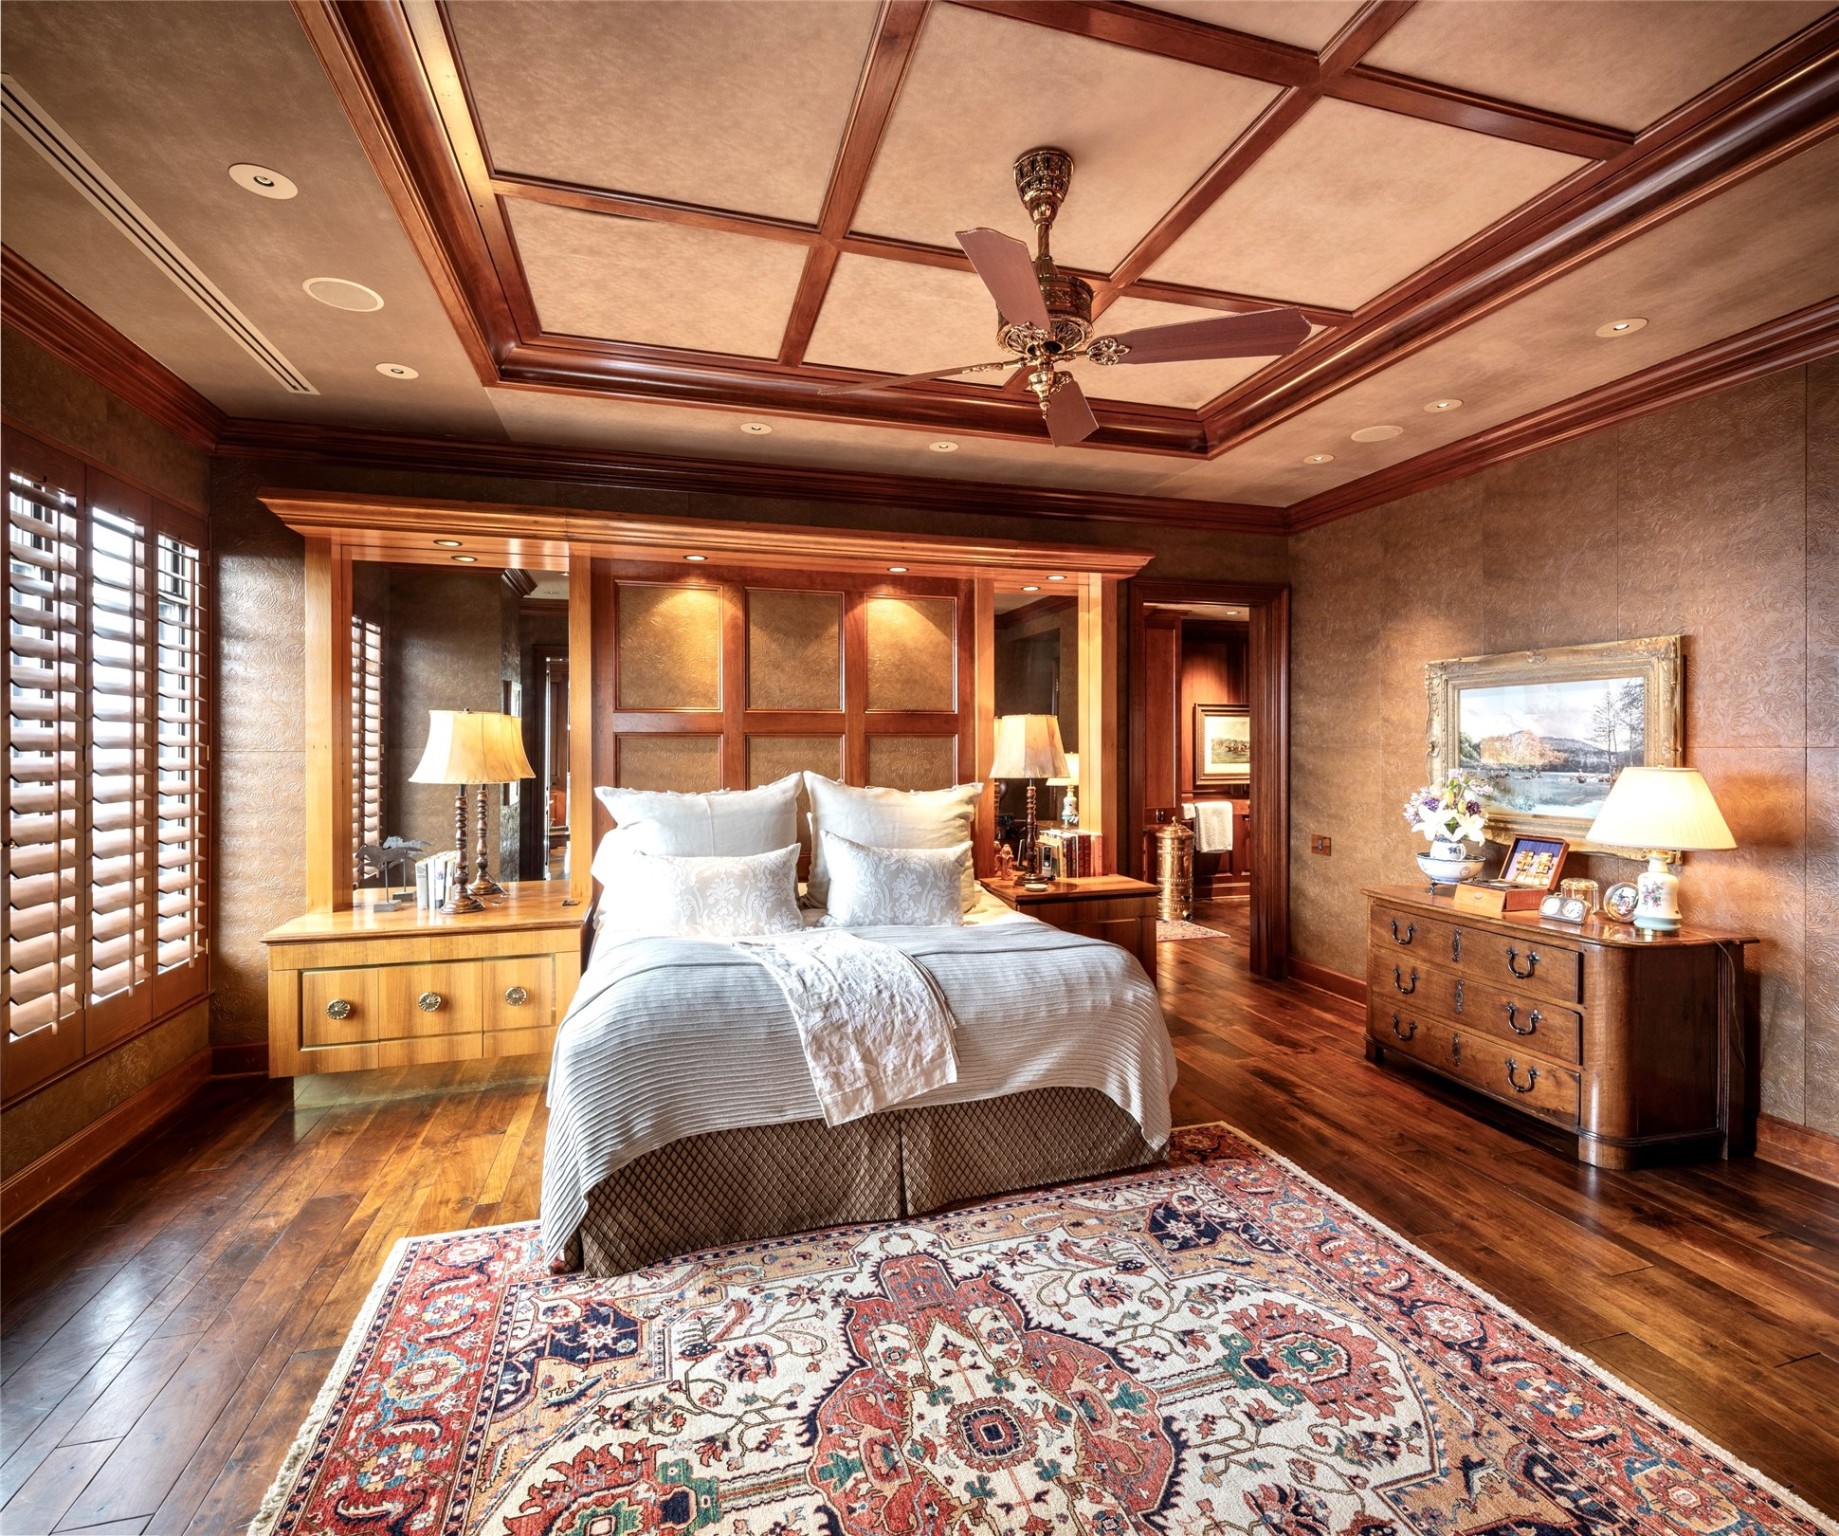 Custom flooring, wood paneling, leather wall treatments, your primary retreat awaits. 